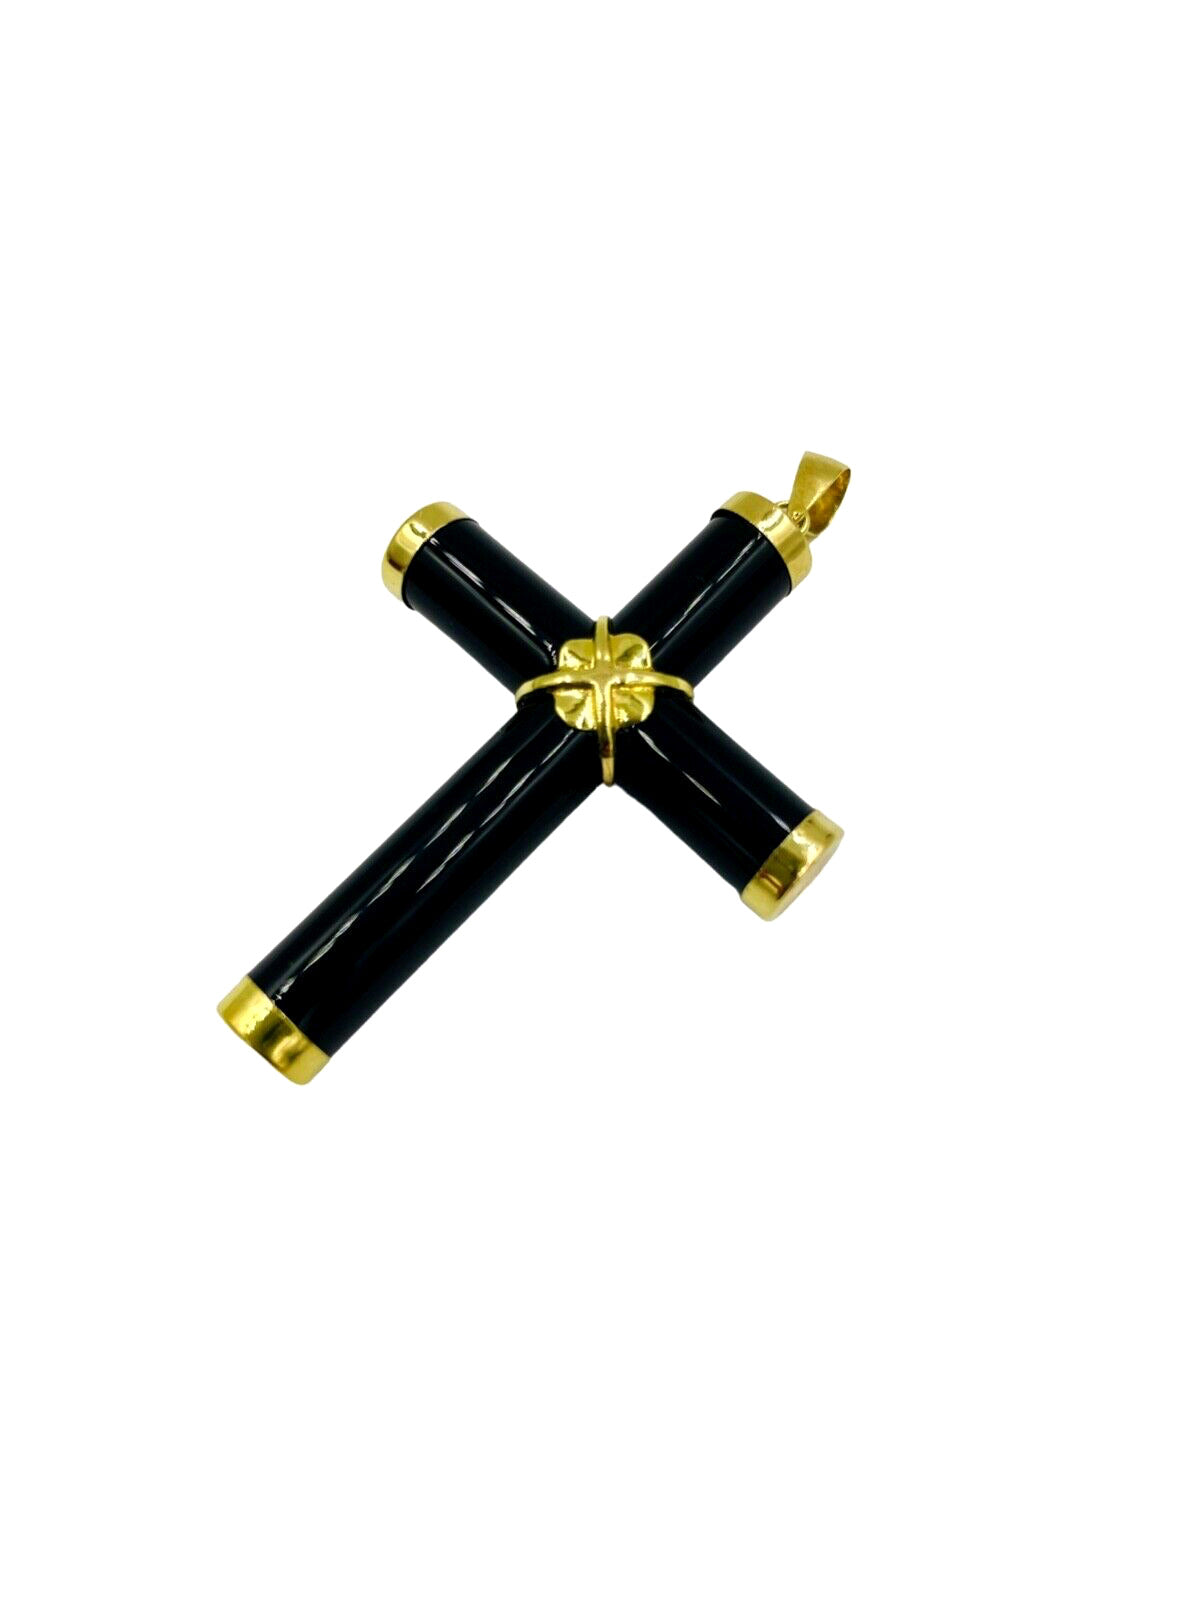 Vintage 14k yellow Gold Onyx flower Cross pendant double sided